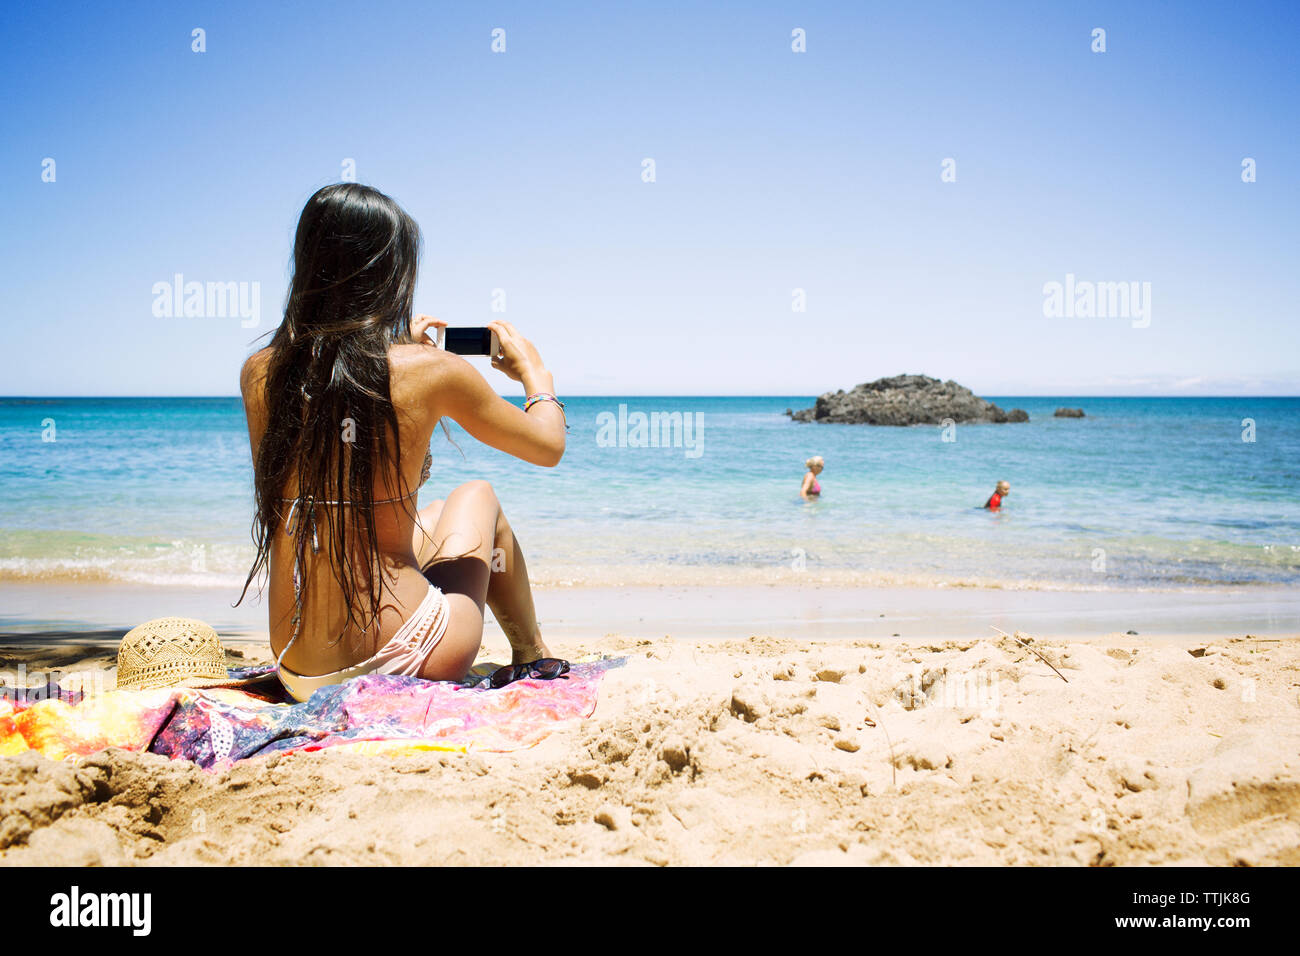 Rear view of woman photographing at beach Banque D'Images